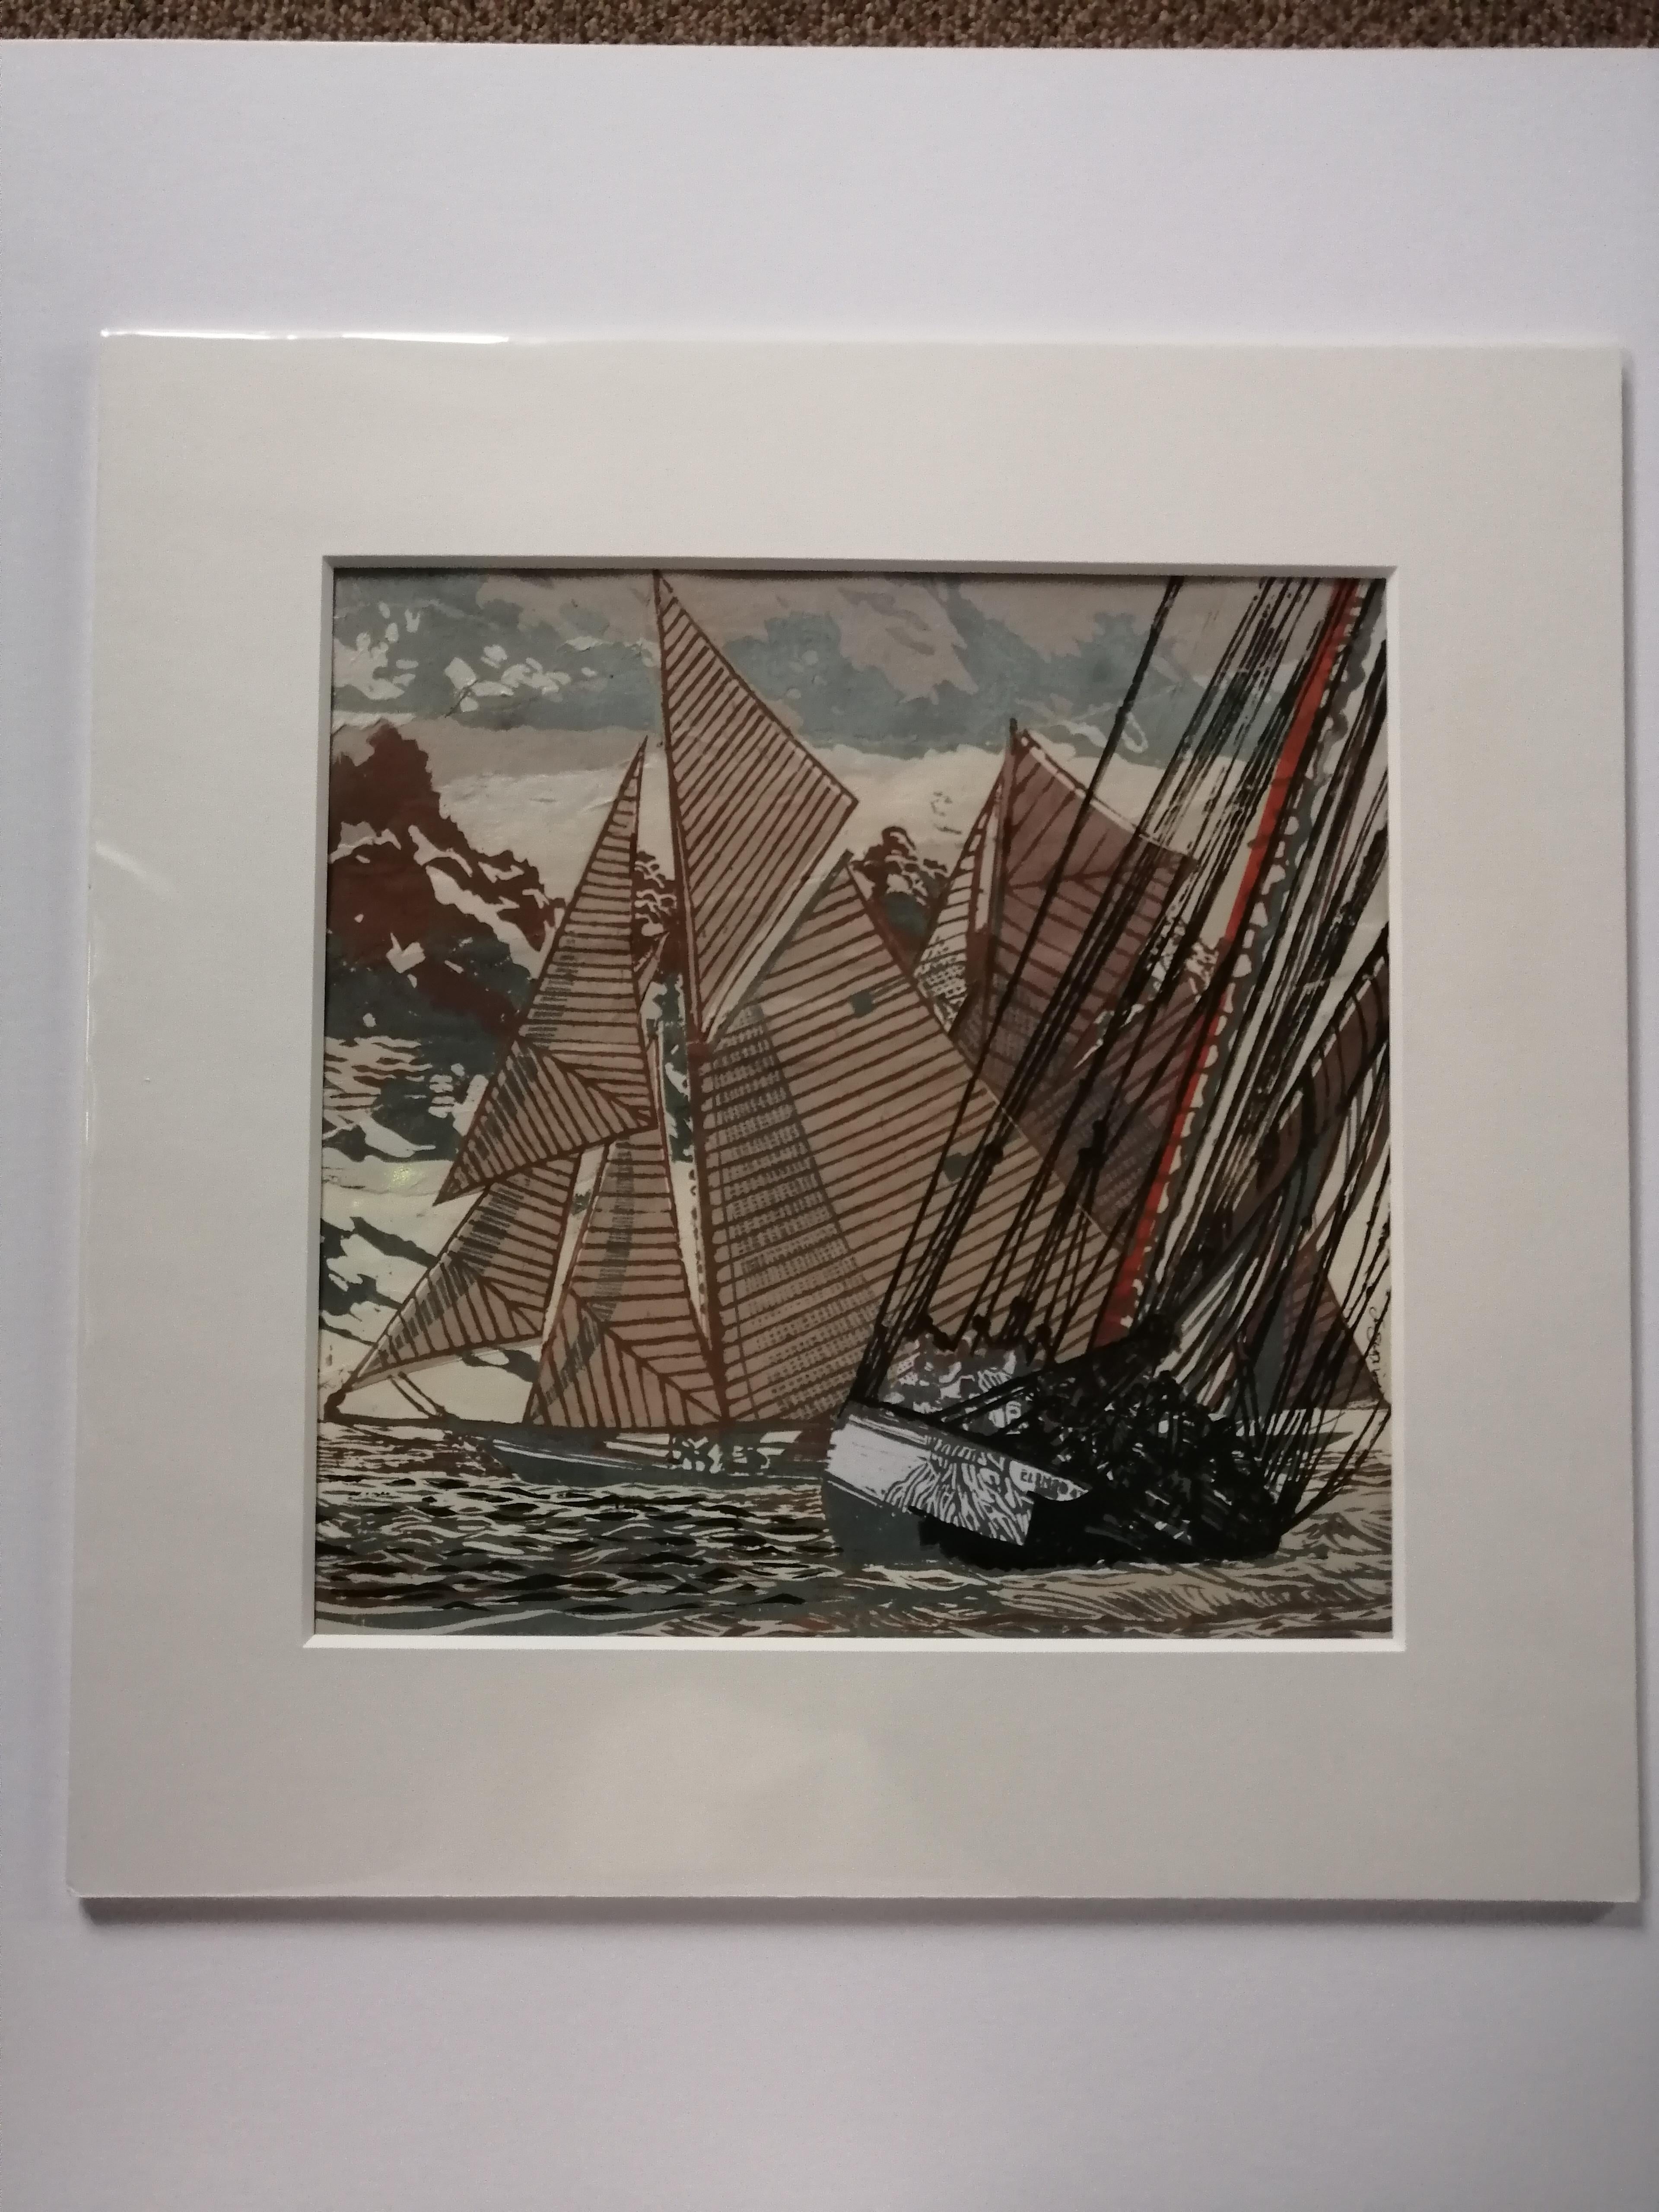 Images of sail printed by linocut on collage every print is in itself an original.

Having cut a series of lino blocks, I prepare collage backgrounds. I handprint onto the collages, which are made up of coloured, textured and decorative